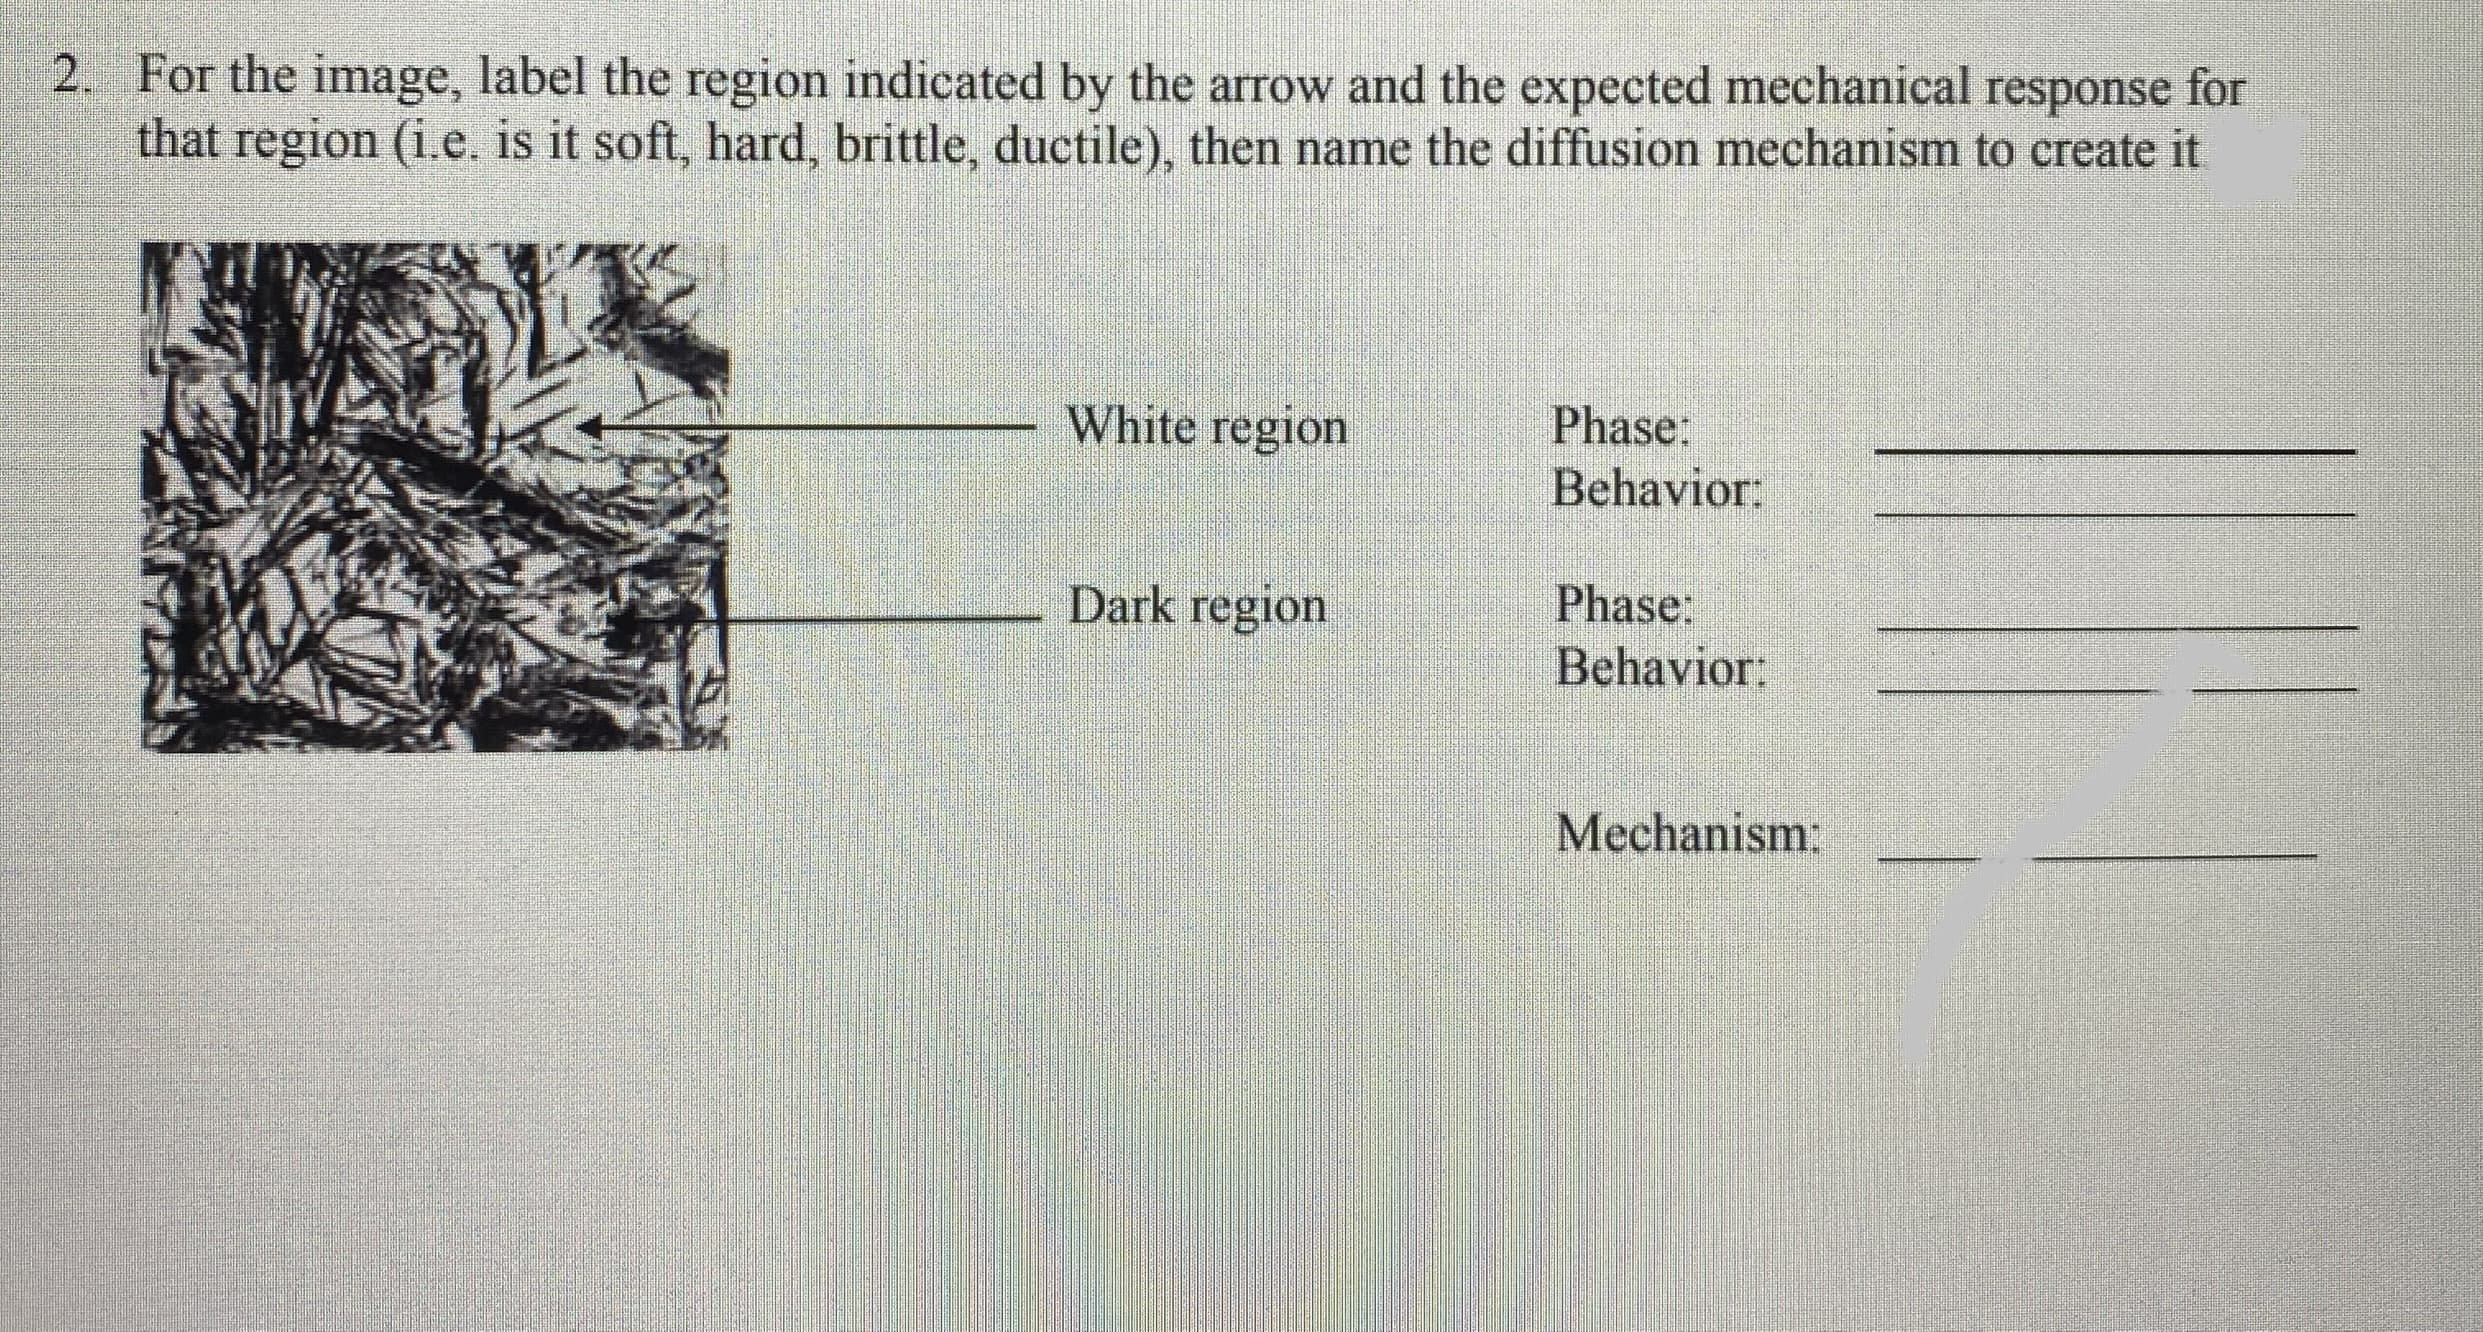 2. For the image, label the region indicated by the arrow and the expected mechanical response for
that region (i.e. is it soft, hard, brittle, ductile), then name the diffusion mechanism to create it
White region
Phase:
Behavior:
Dark region
Phase:
Behavior:
Mechanism:
